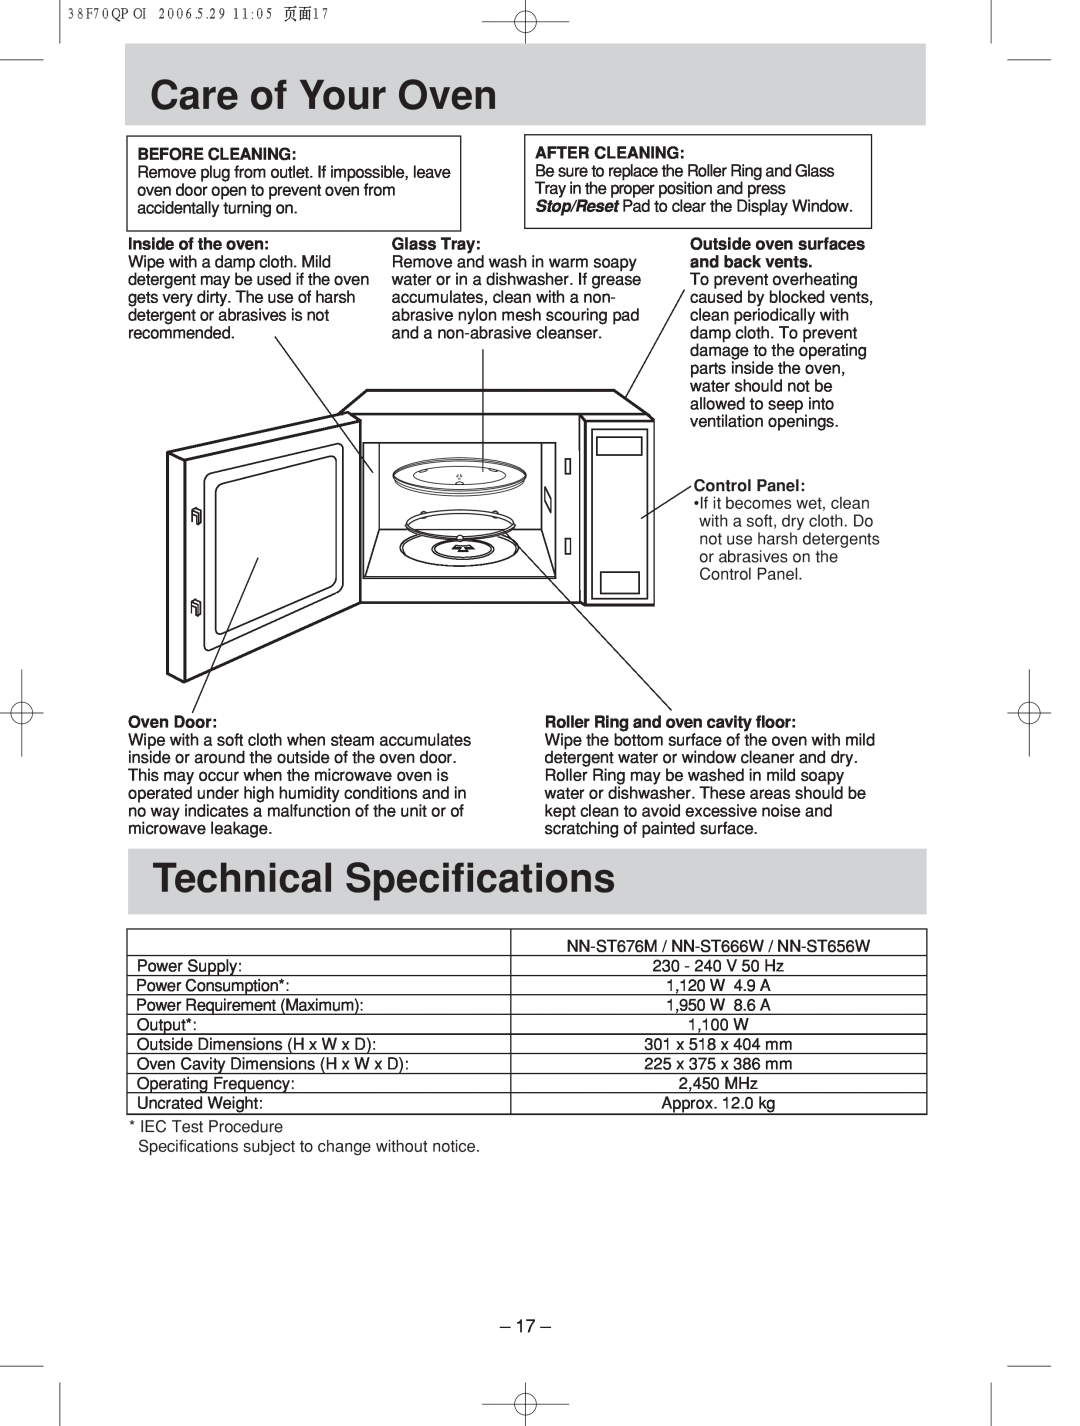 Panasonic NN-ST676M, NN-ST656W, NN-ST666W manual Care!!!!!of! Your Oven, Technical Specifications 